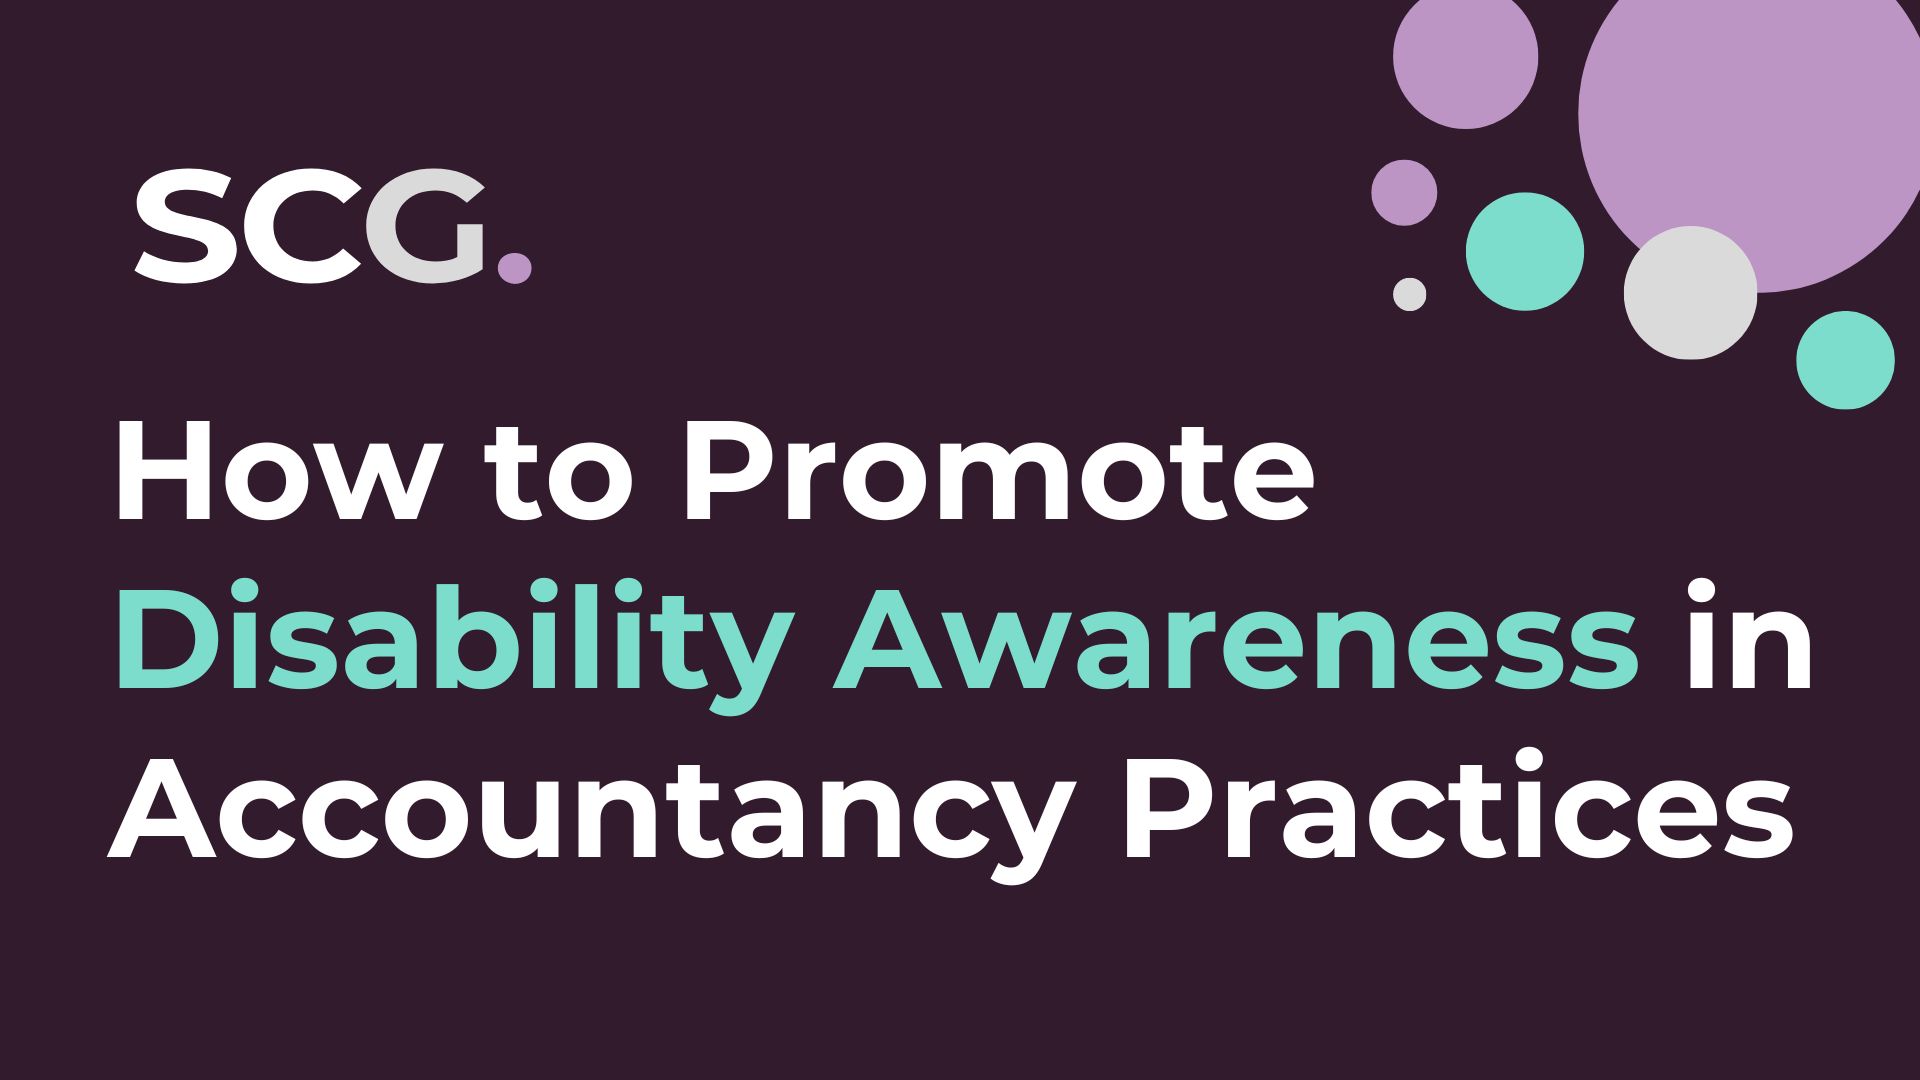 How to Promote Disability Awareness in Accountancy Practices